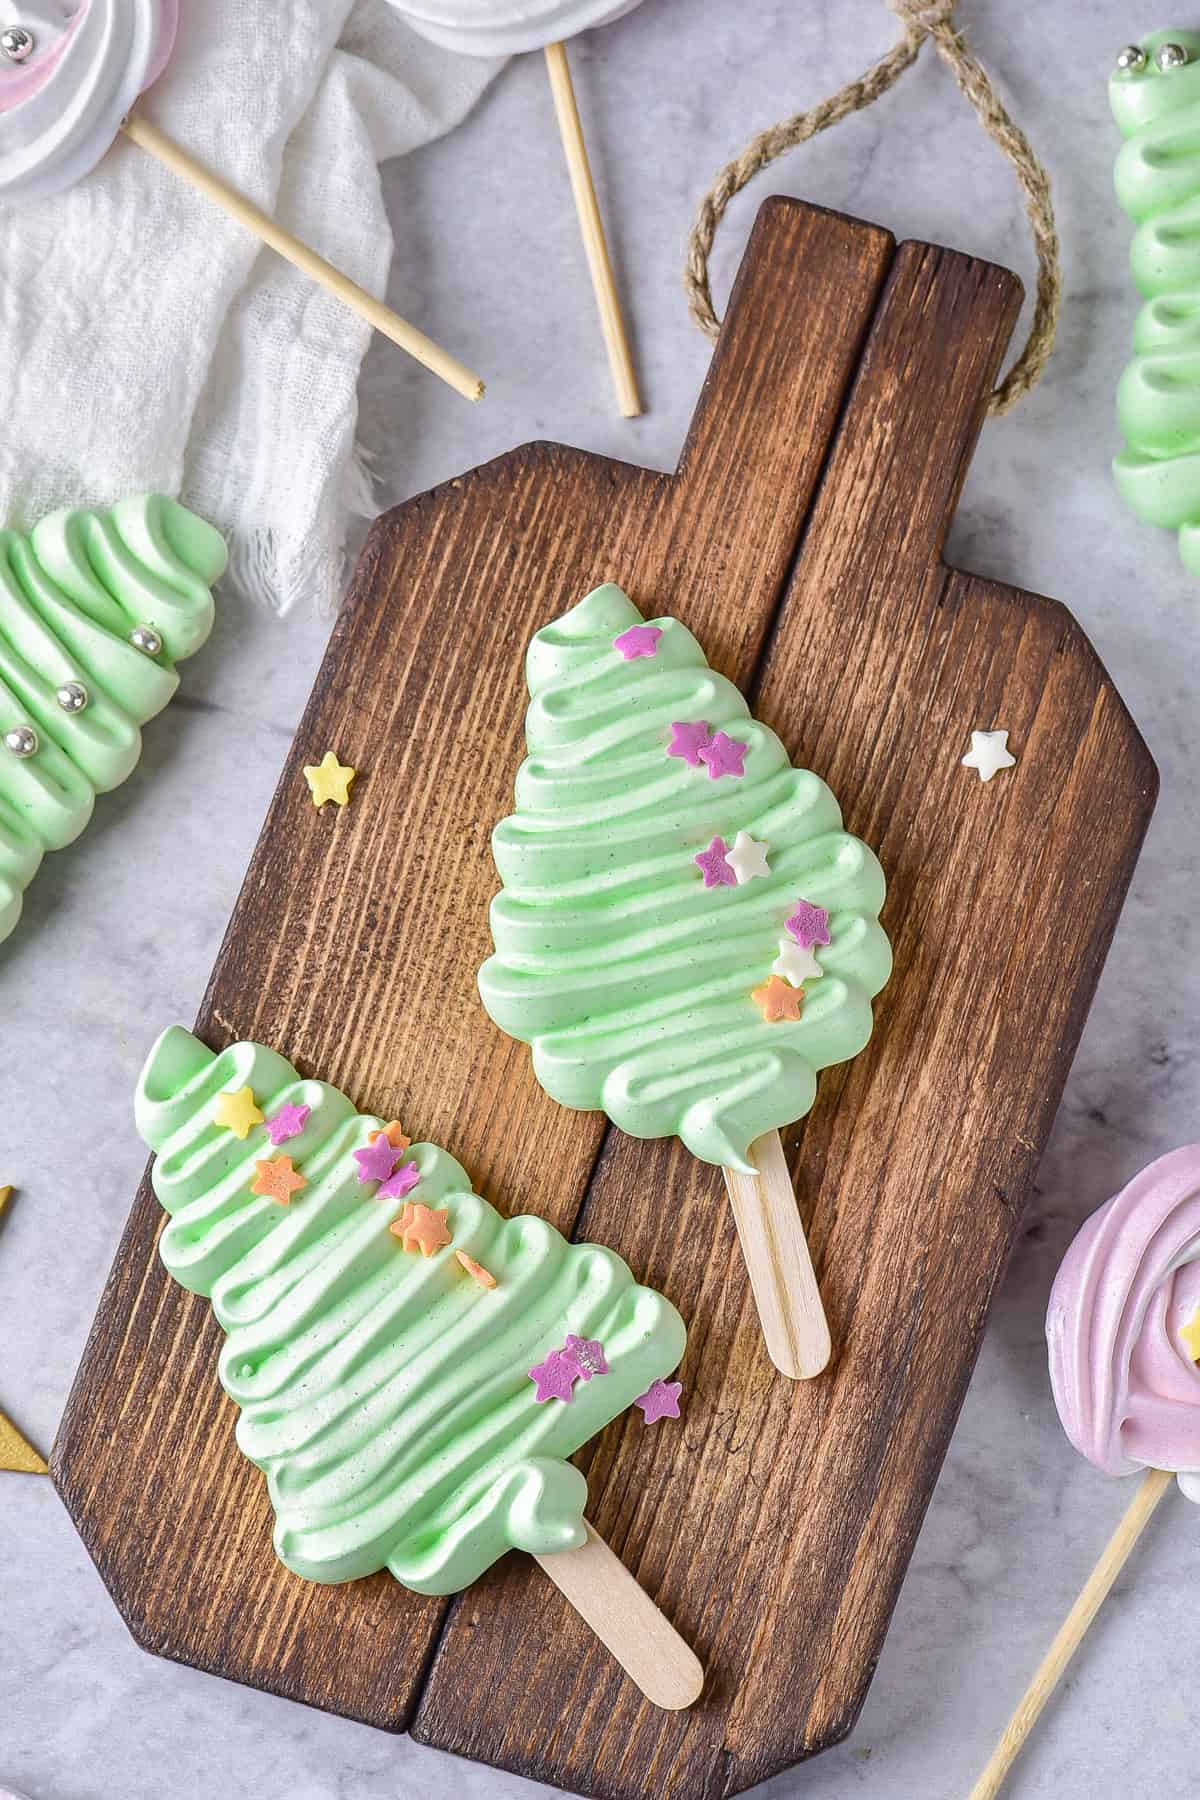 Two meringues shaped like Christmas trees on a wooden board.